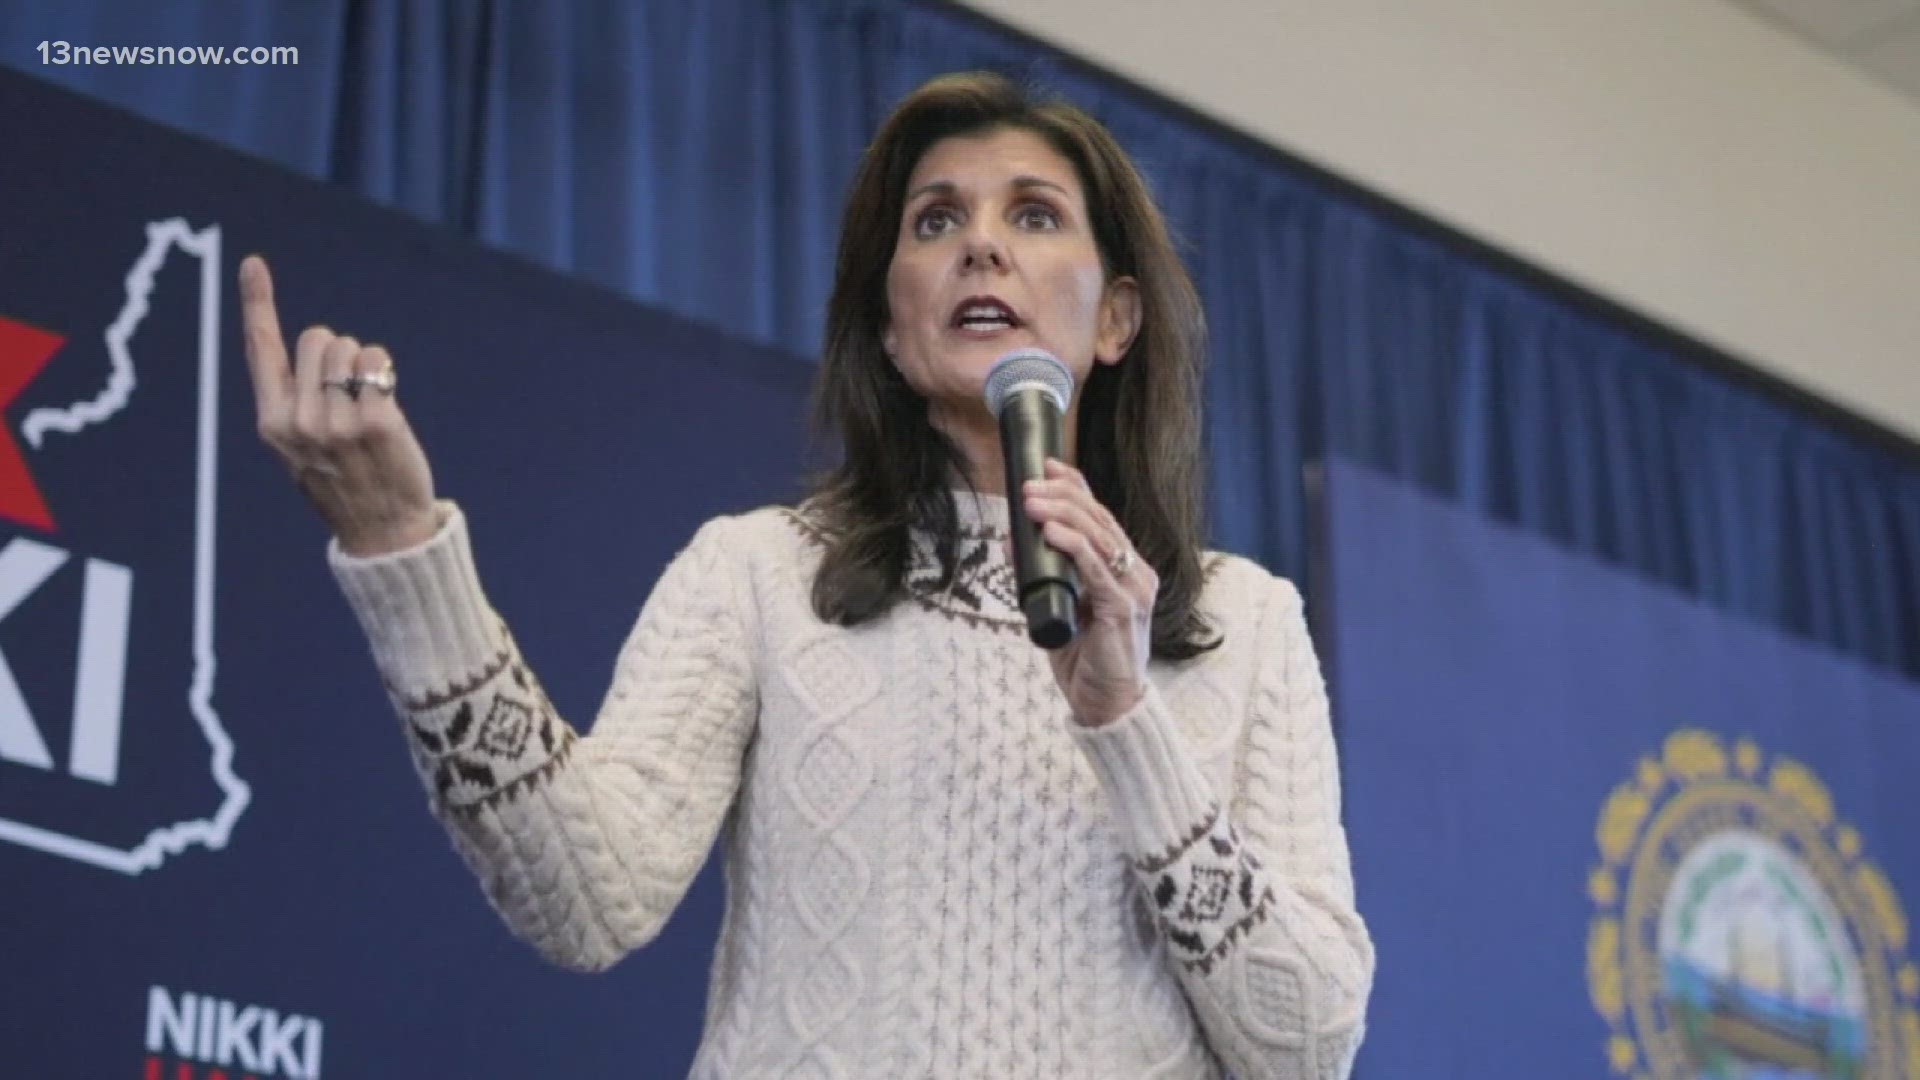 A group of conservative leaders are urging Republican presidential candidate Nikki Haley to get out of the race and endorse Donald Trump.